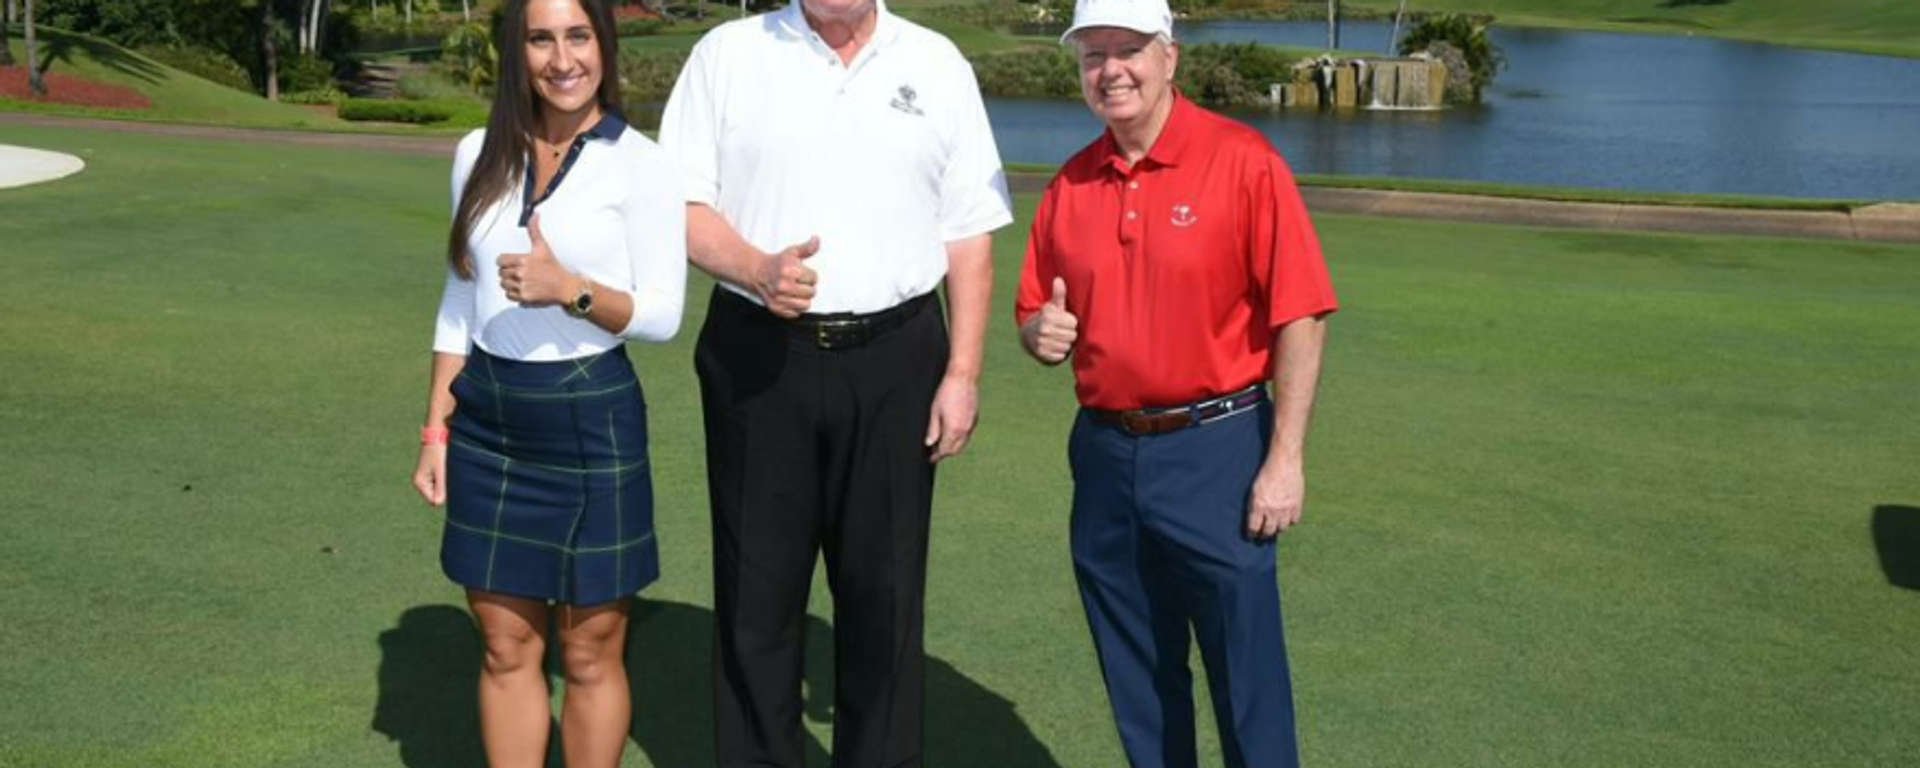 Inna Yashchyshyn poses with former President Donald Trump and Sen. Lindsey Graham, R-S.C., at Mr. Trump’s private golf course just miles from Mar-a-Lago in May 2021. - Sputnik International, 1920, 27.08.2022